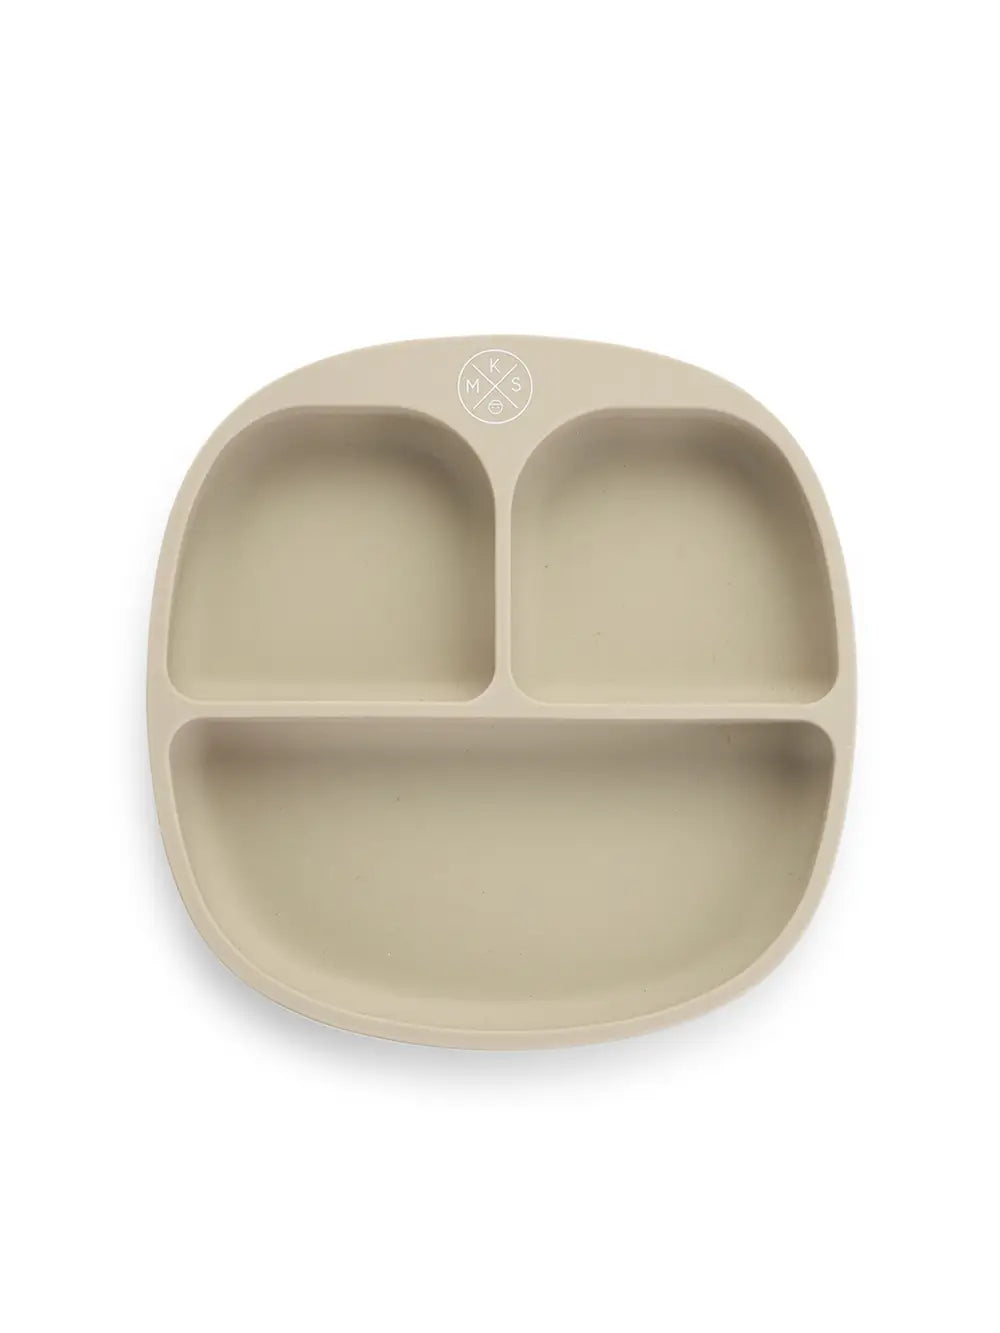 Silicone Suction Kids Plate w/ Dividing Sections - Lulie